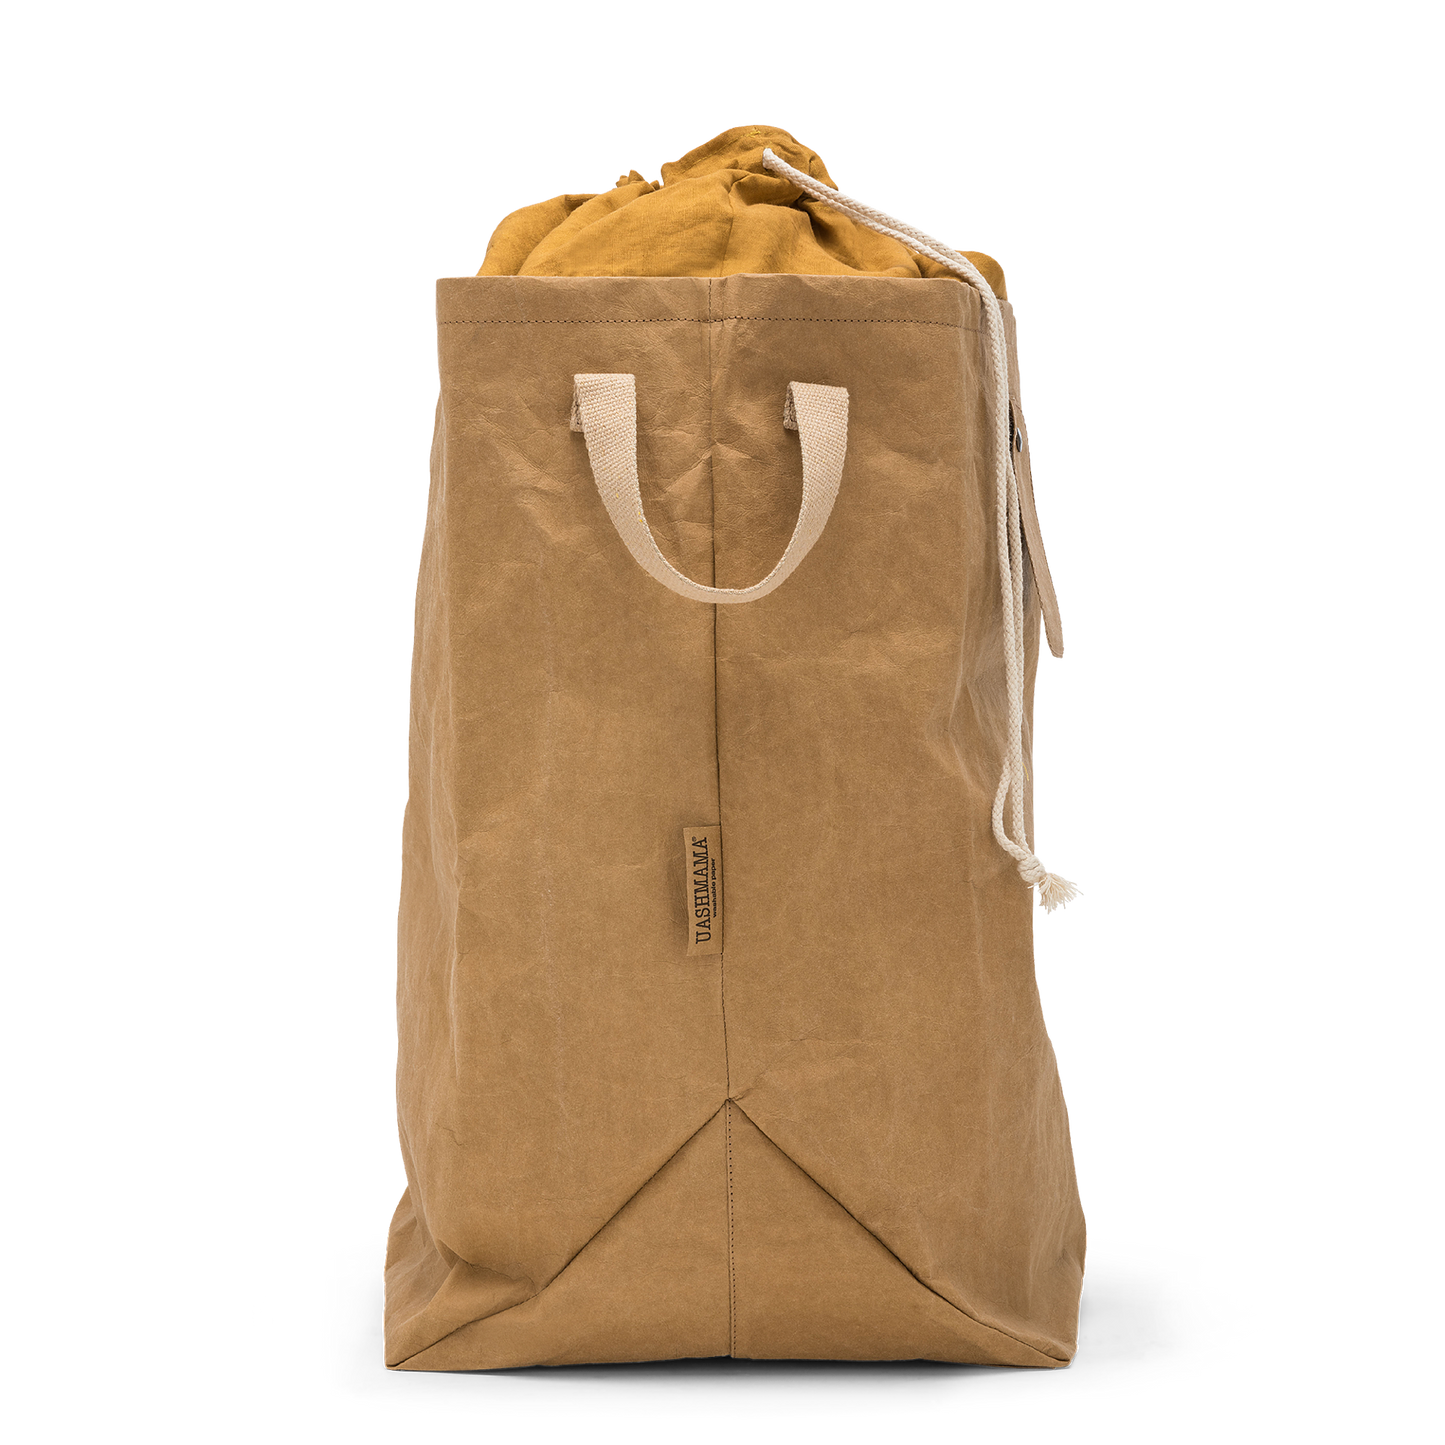 A washable paper laundry bag is shown in tan from a side angle. It features two side handles, a popper tab, and an interior drawstring lining.